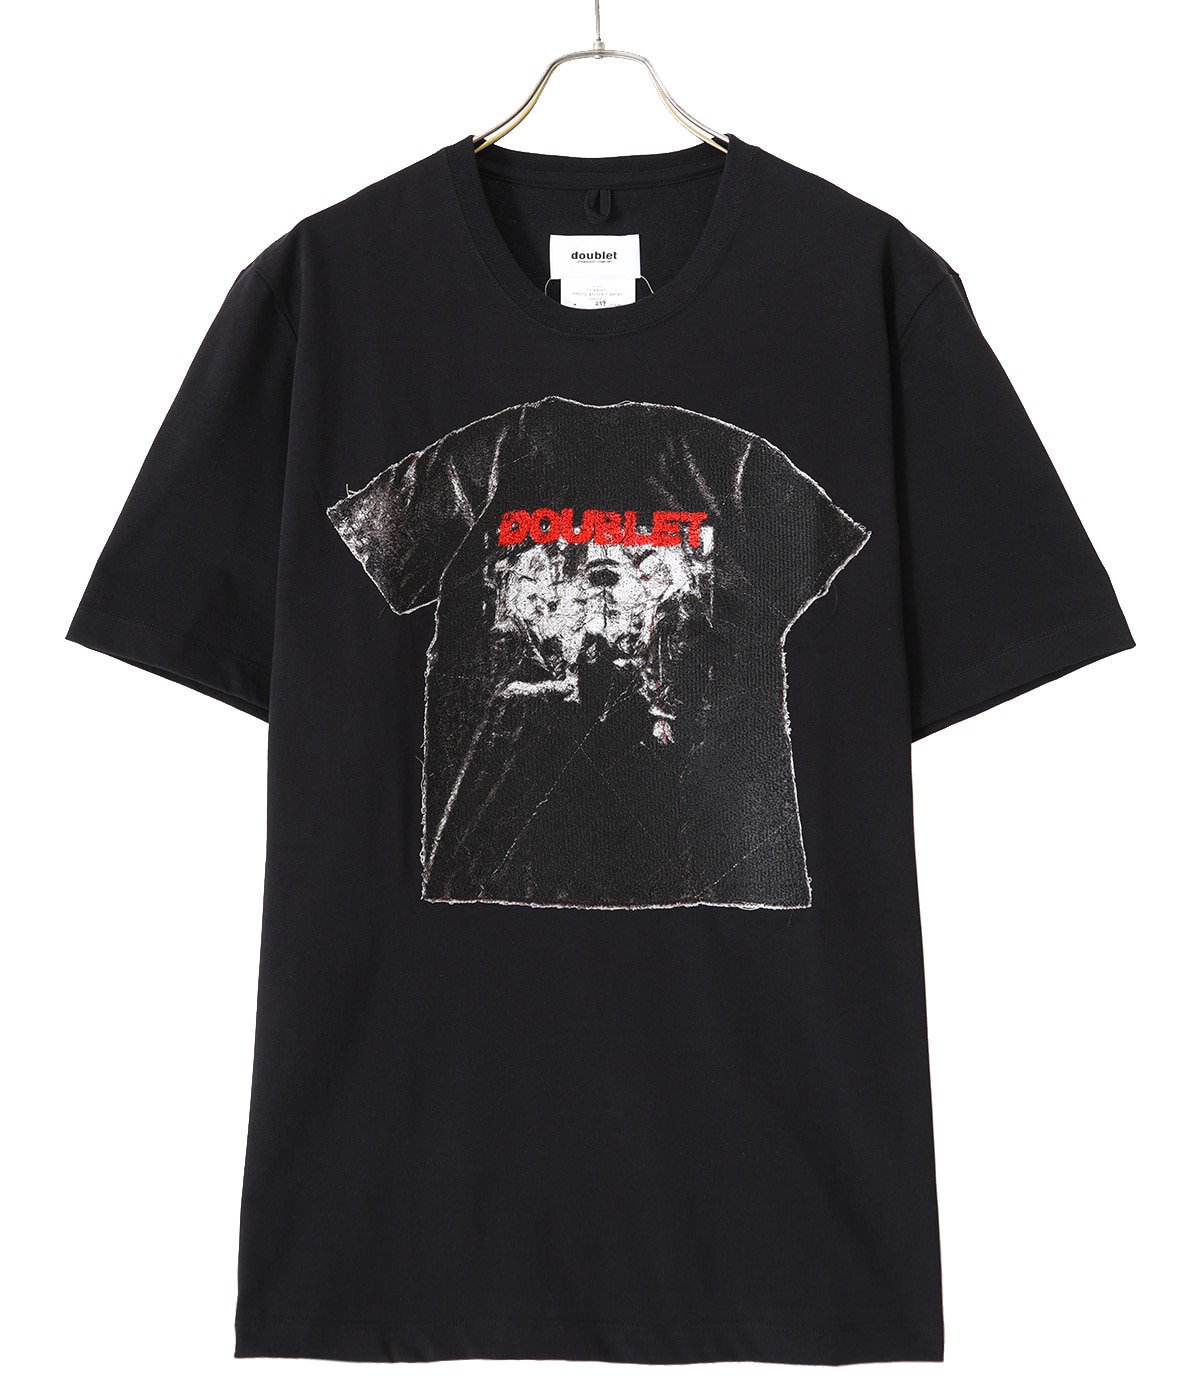 “T-SHIRT” PHOTO STITCH T-SHIRT | doublet(ダブレット) / トップス カットソー半袖・Tシャツ  (メンズ)の通販 - ARKnets(アークネッツ) 公式通販 【正規取扱店】